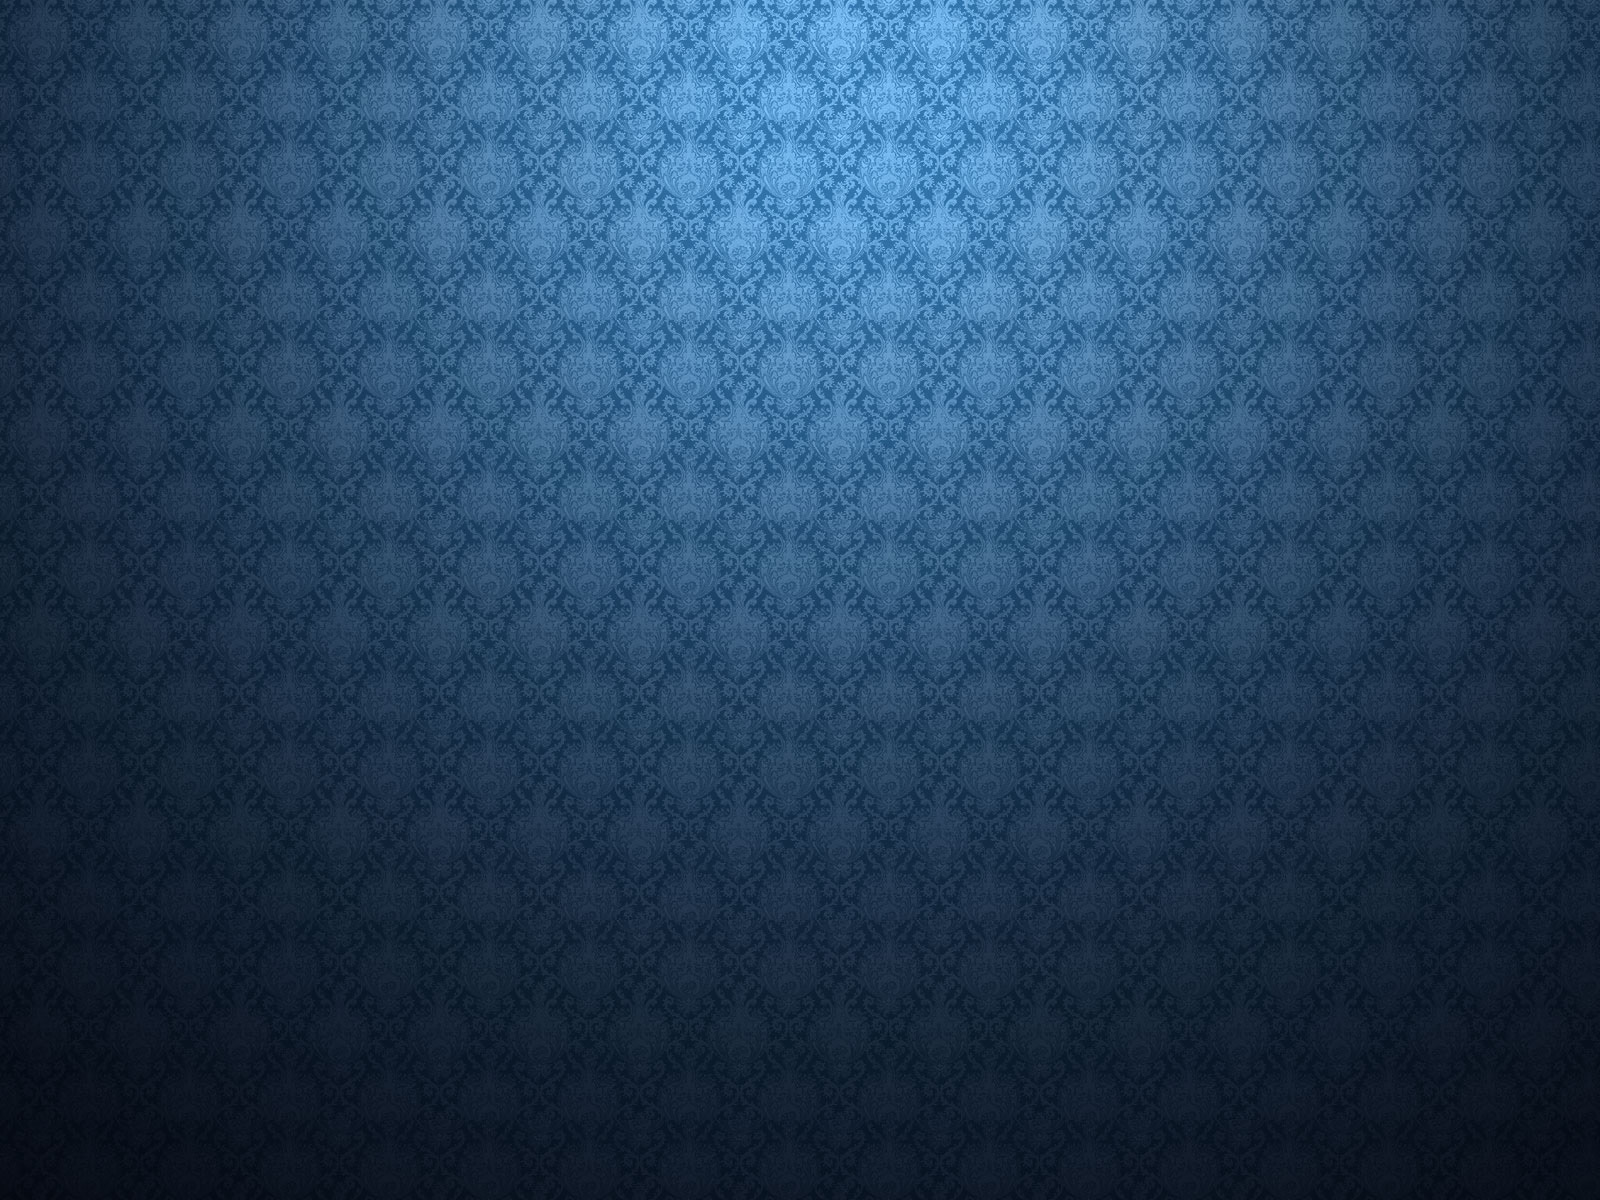 hd blue texture wallpapers hd wallpapers hd blue texture wallpapers hd